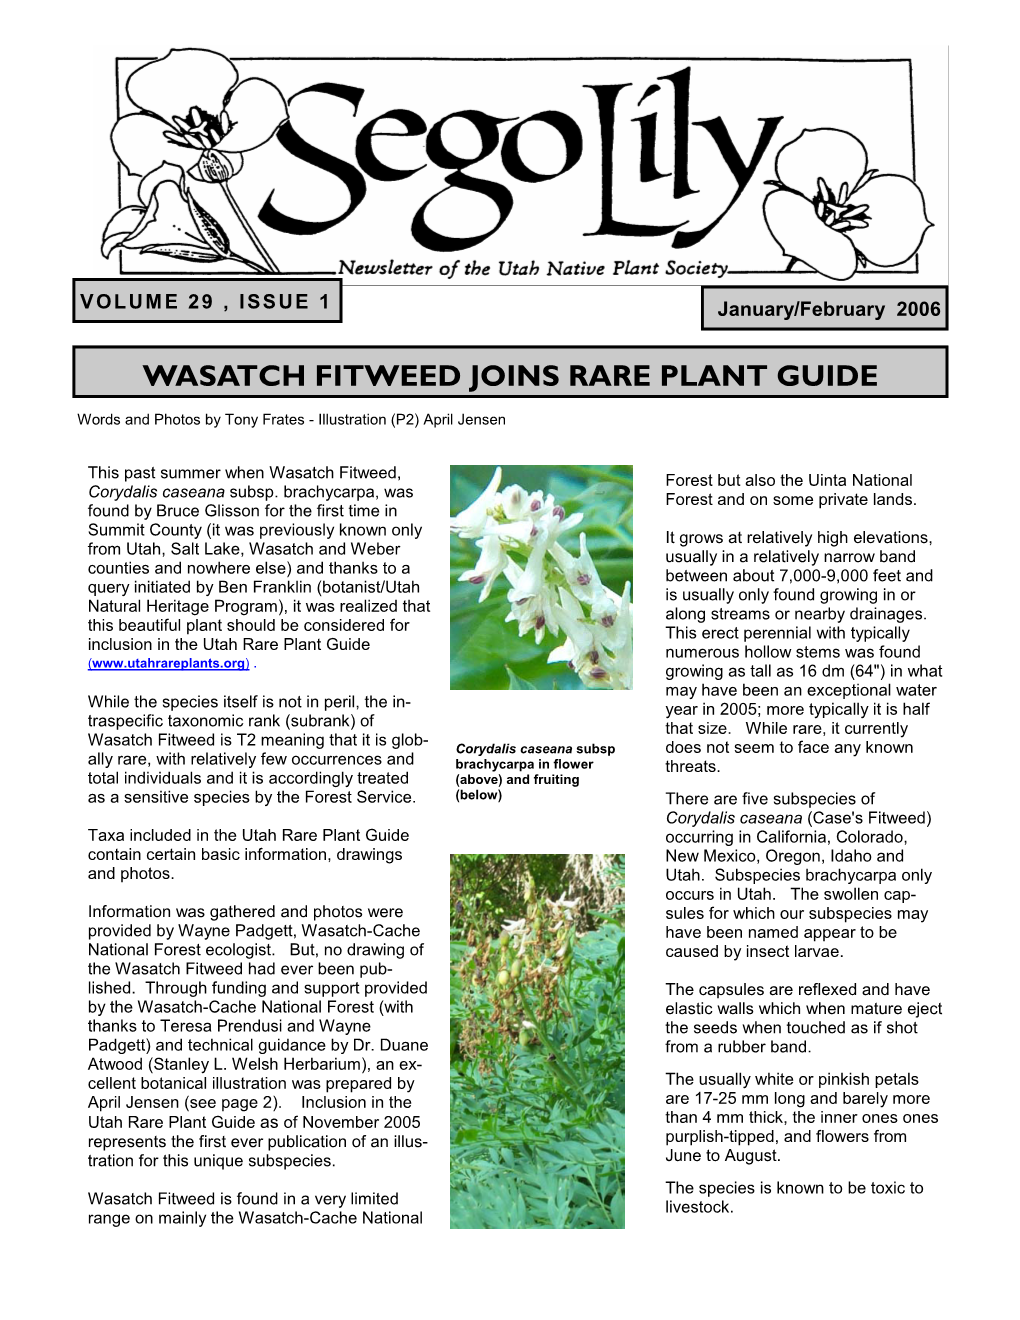 Wasatch Fitweed Joins Rare Plant Guide